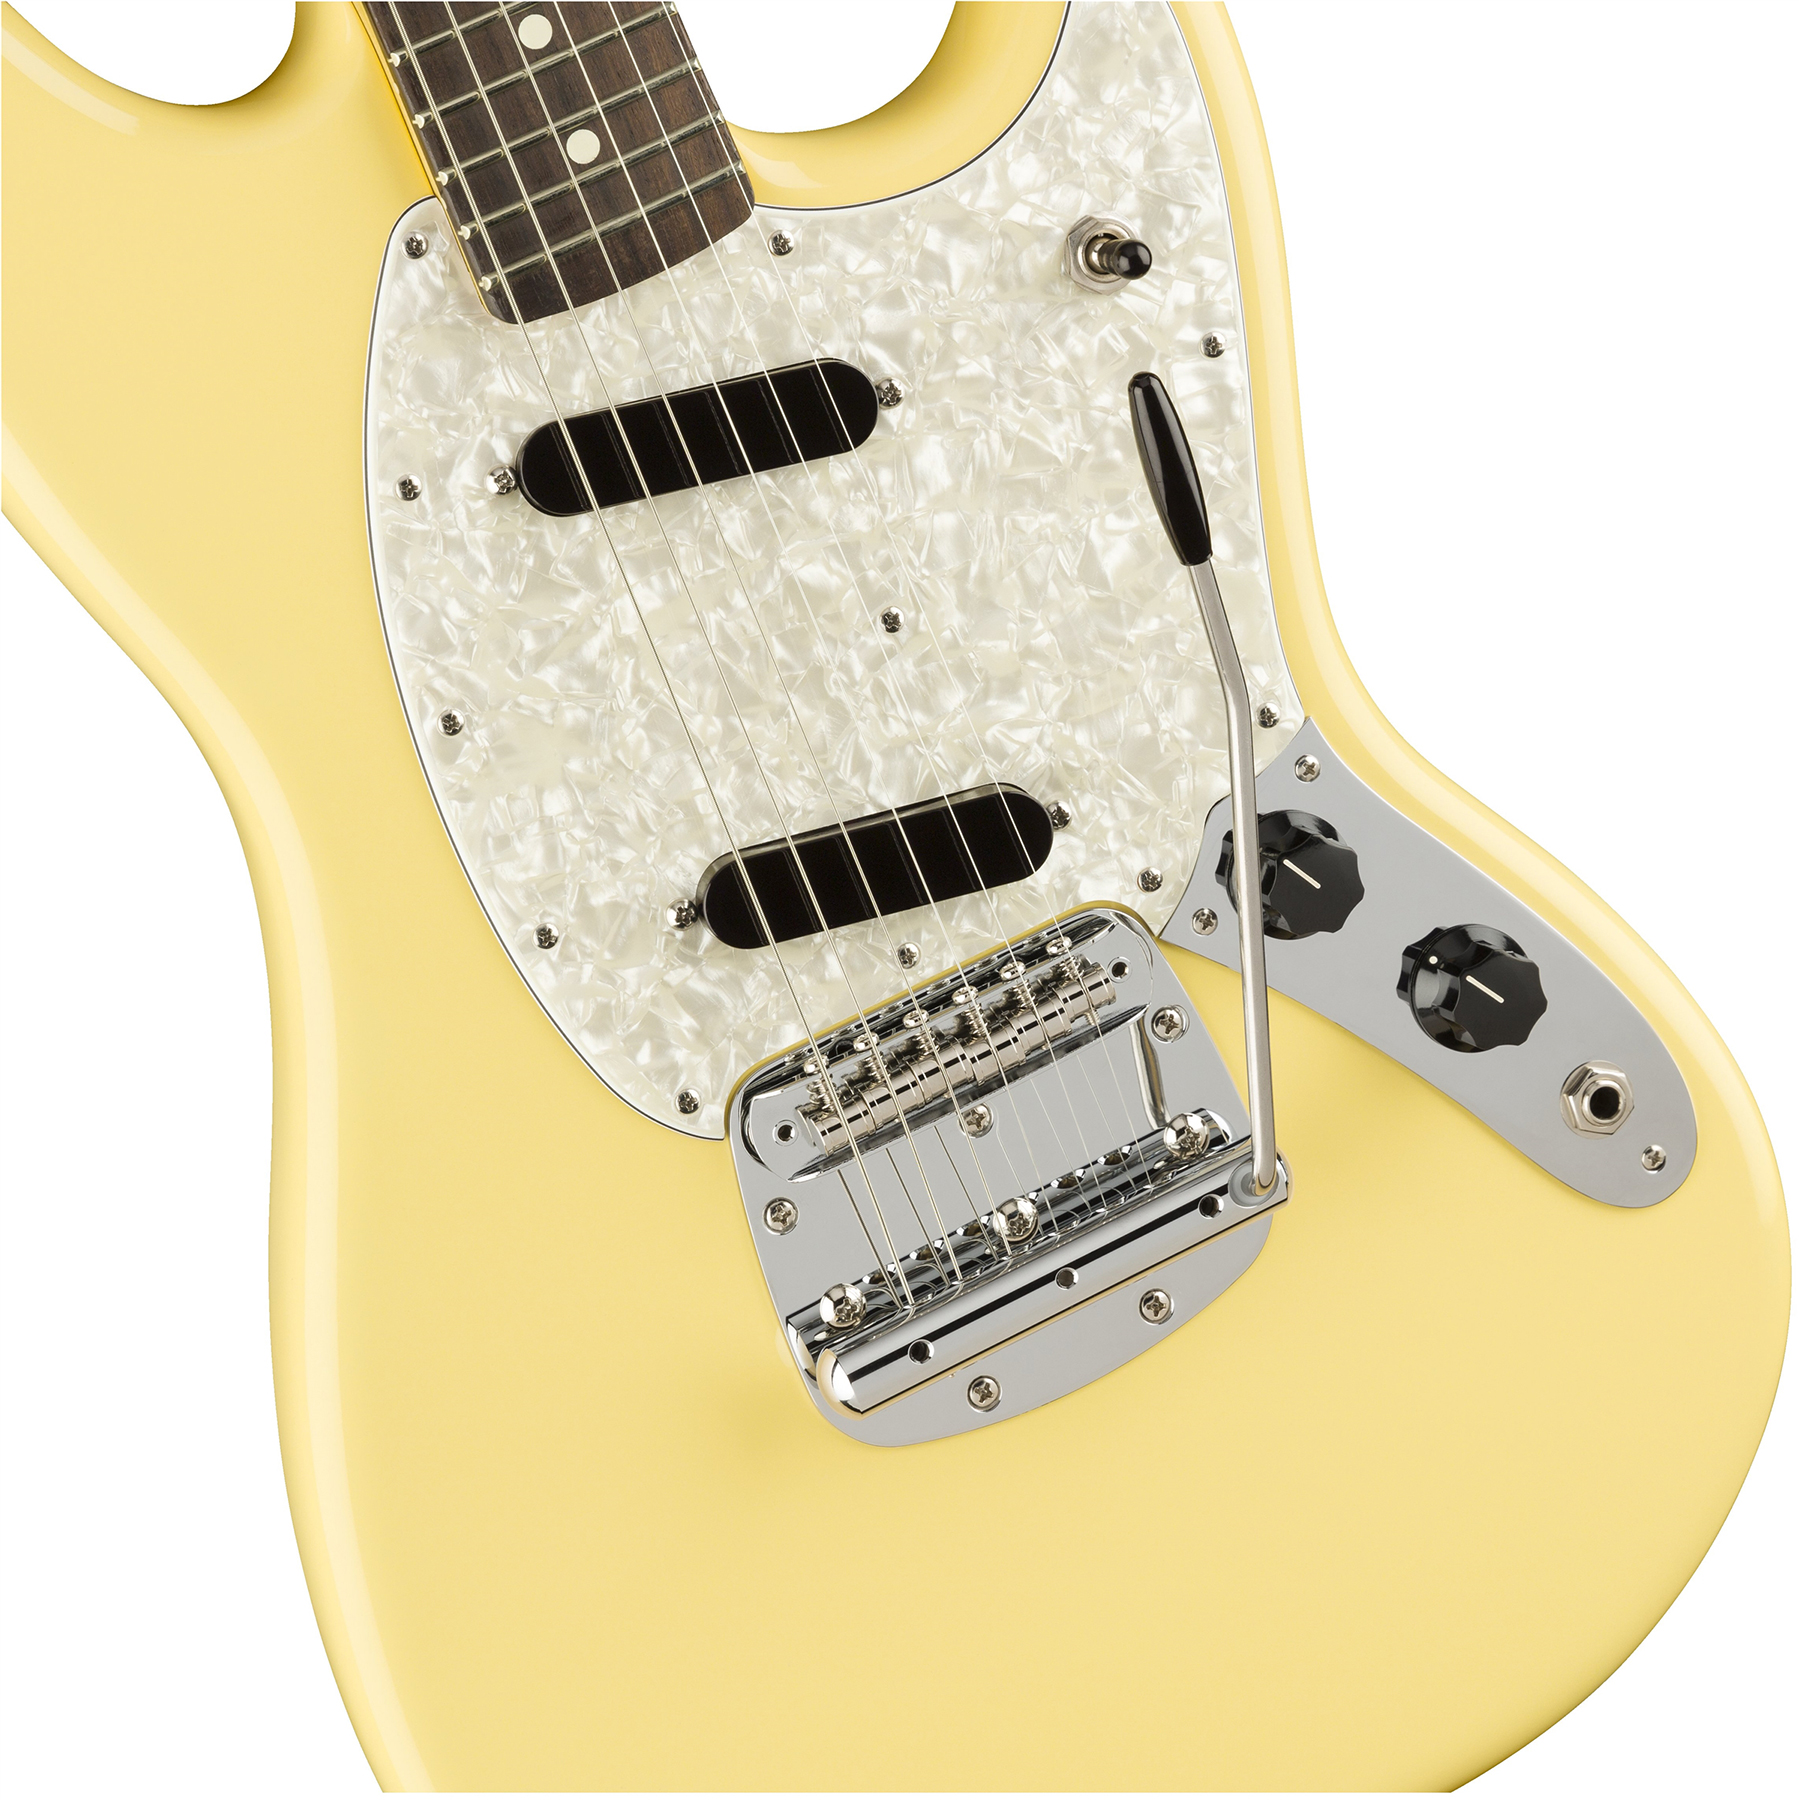 Fender Mustang American Performer Usa Ss Rw - Vintage White - Guitare Électrique Double Cut - Variation 2